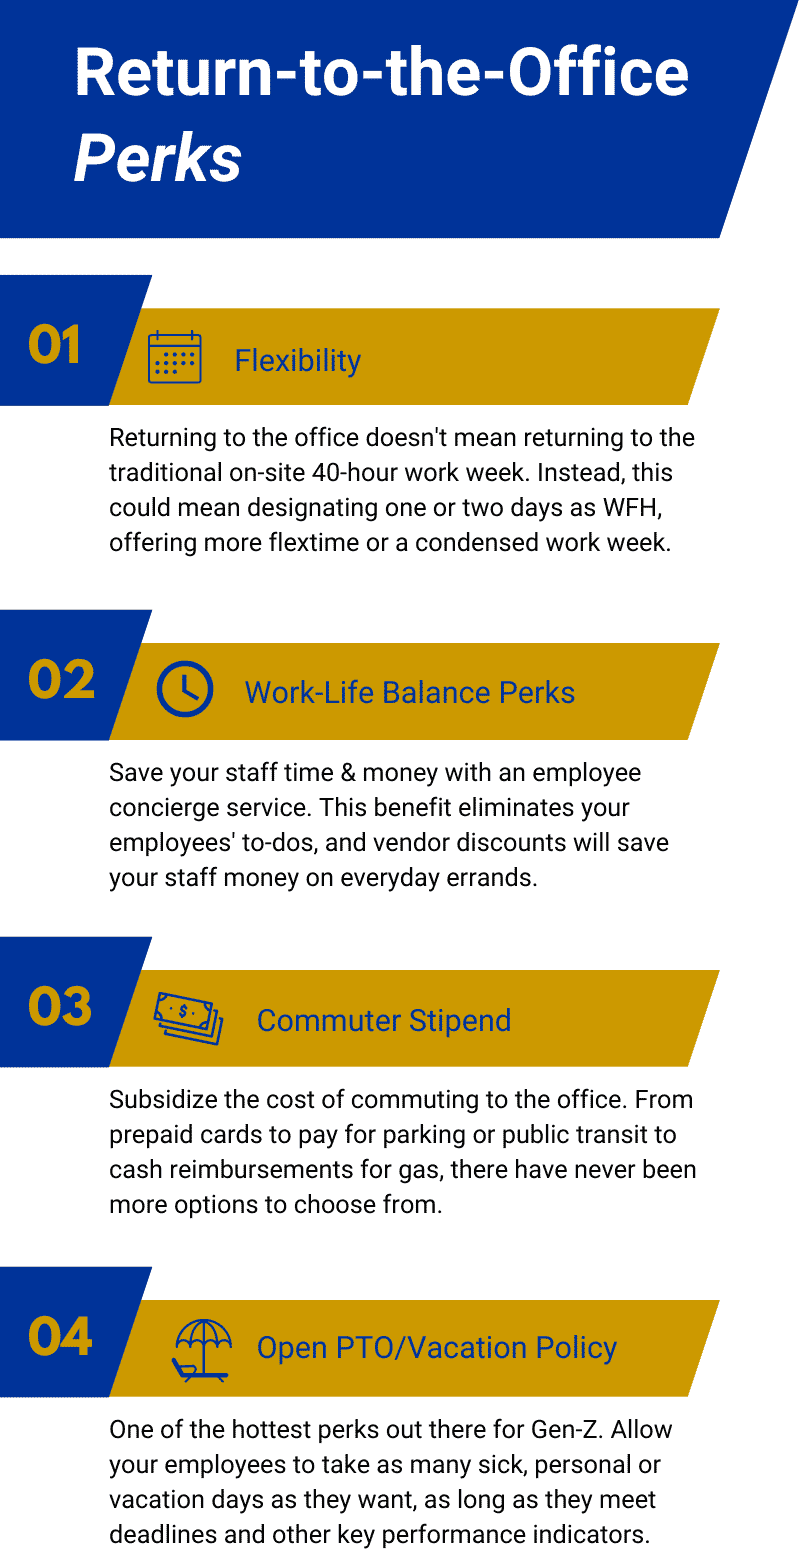 Infographic by Best Upon Request that lists the 4 hottest return-to-work perks to lure employees back to the office.